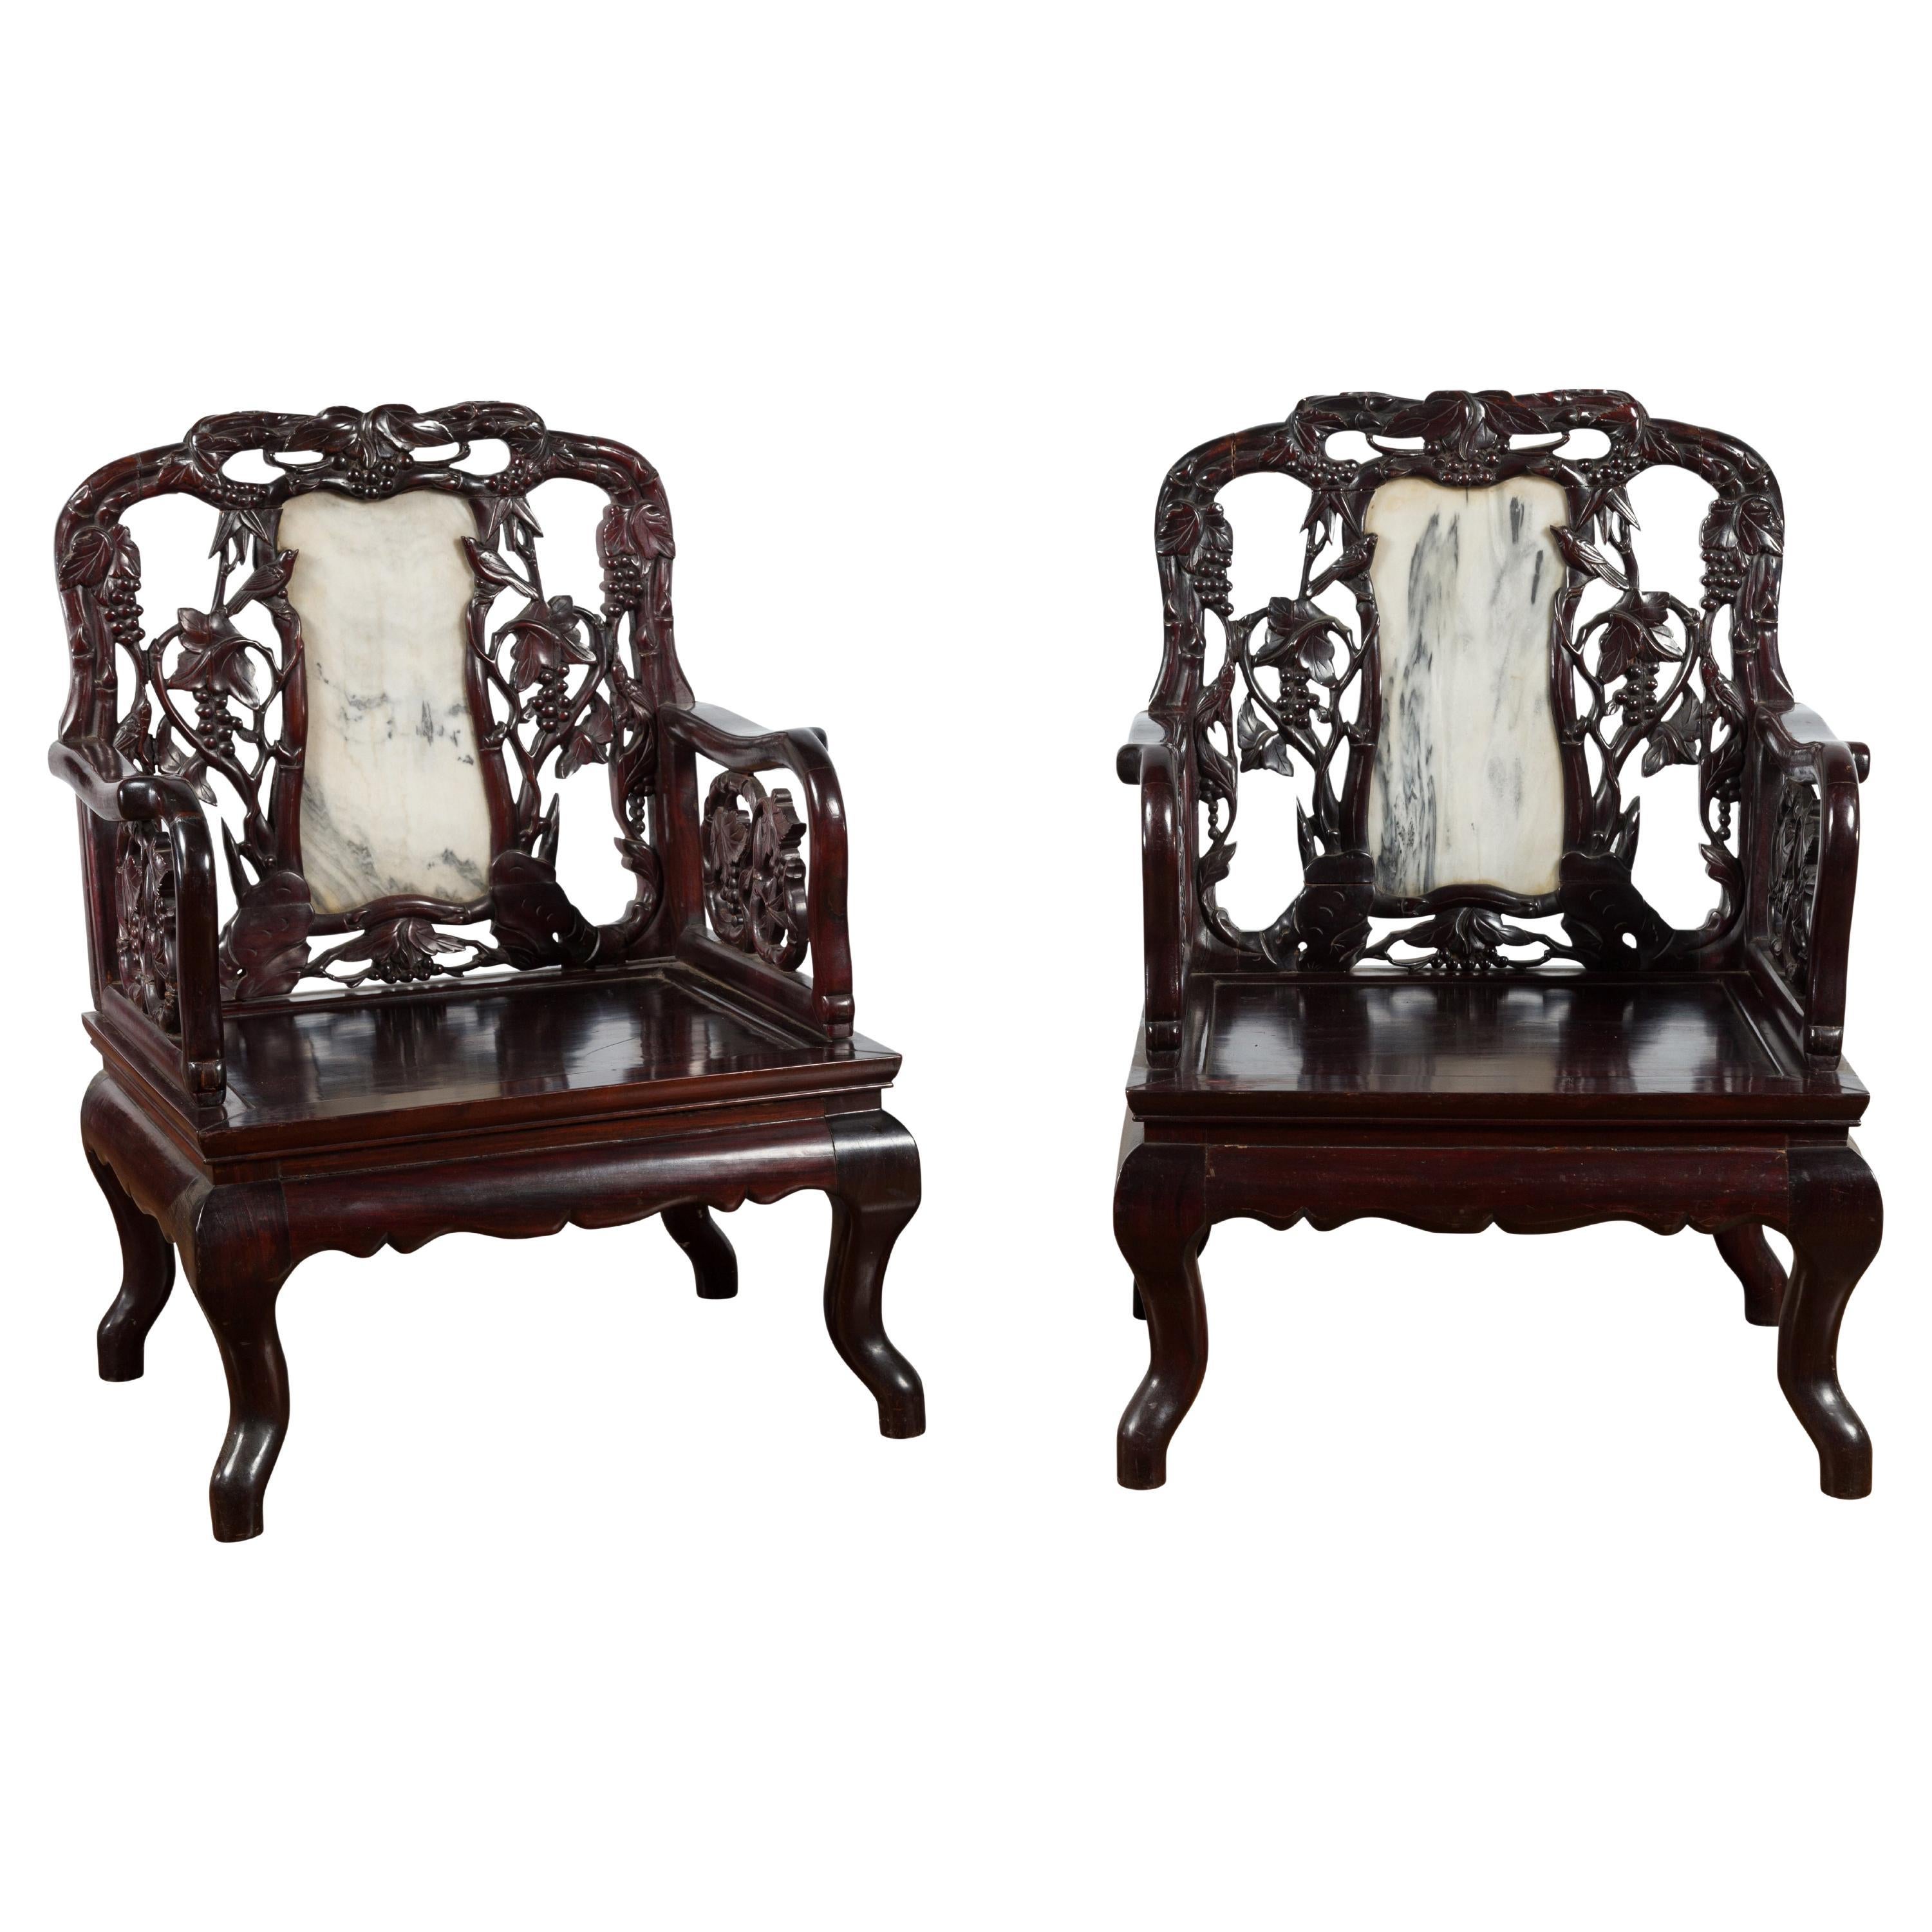 Pair of Chinese Hand Carved Rosewood Armchairs with Marble Splat and Dark Patina